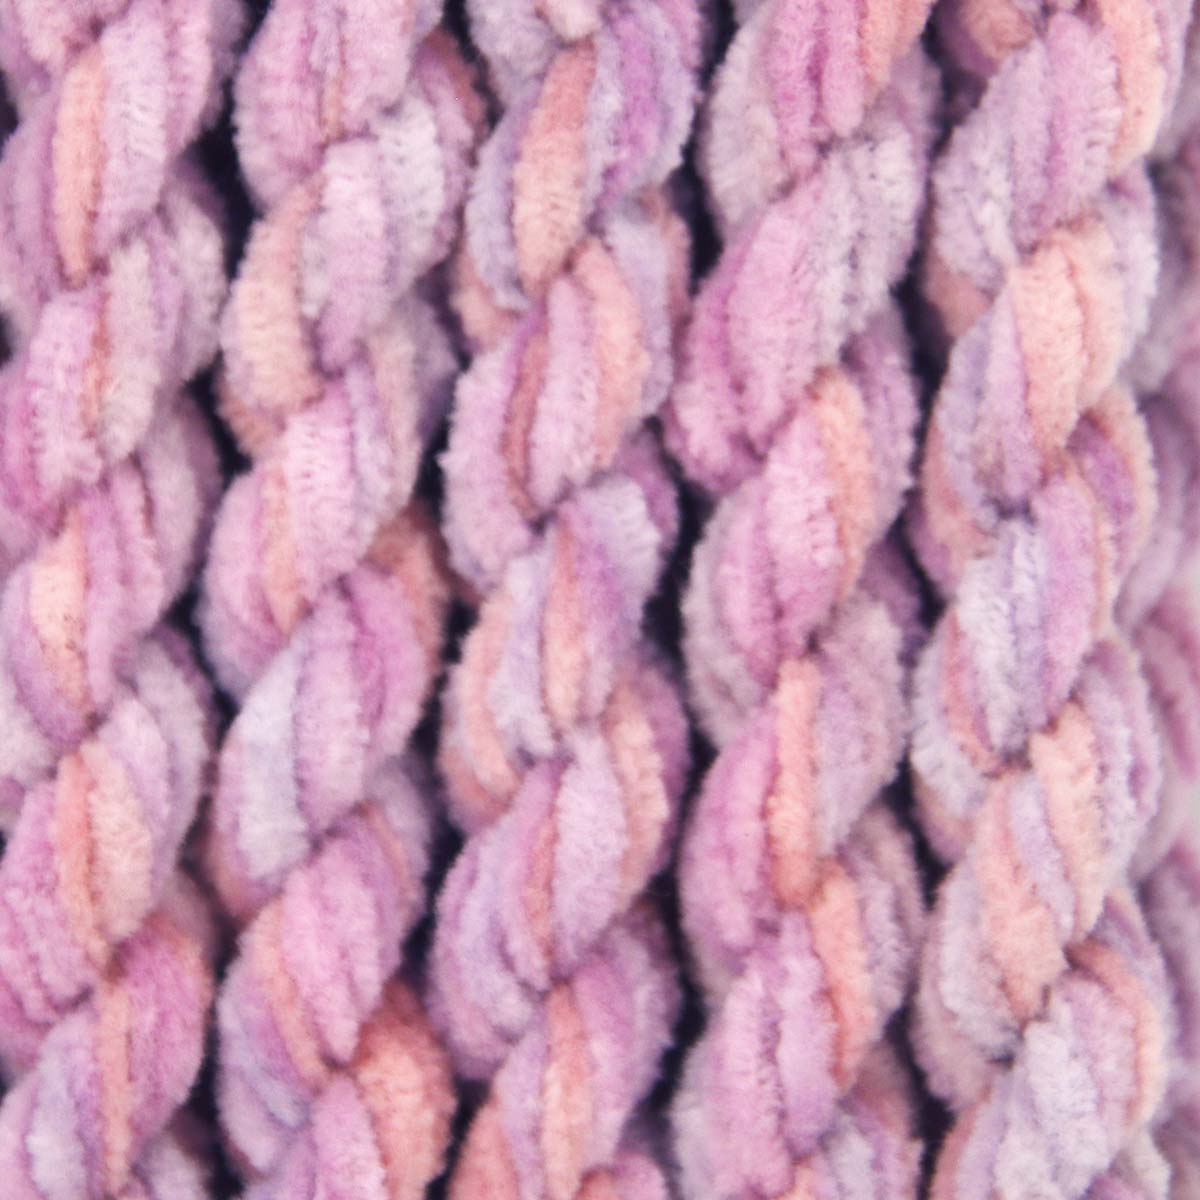 www.colourstreams.com.au Colour Streams Hand Dyed Chenille Threads Slow Stitch Embroidery Textile Arts Fibre DL 3 Musk Rose Purples Pinks